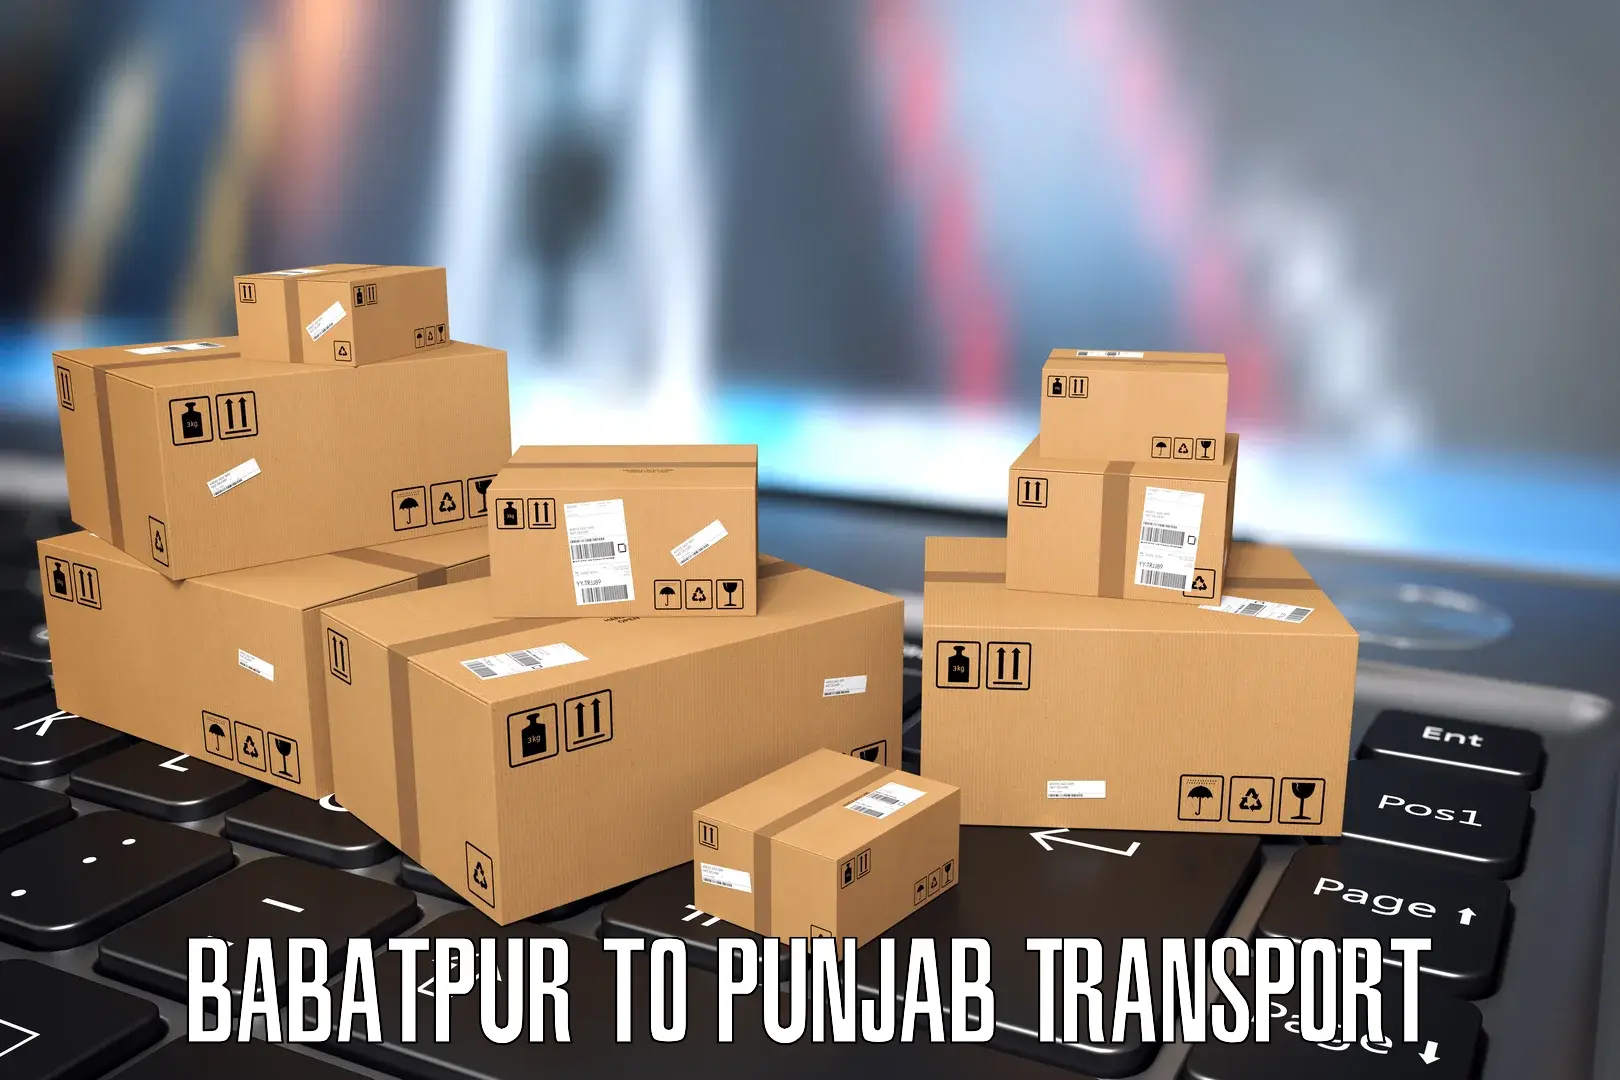 Container transport service Babatpur to Dhuri